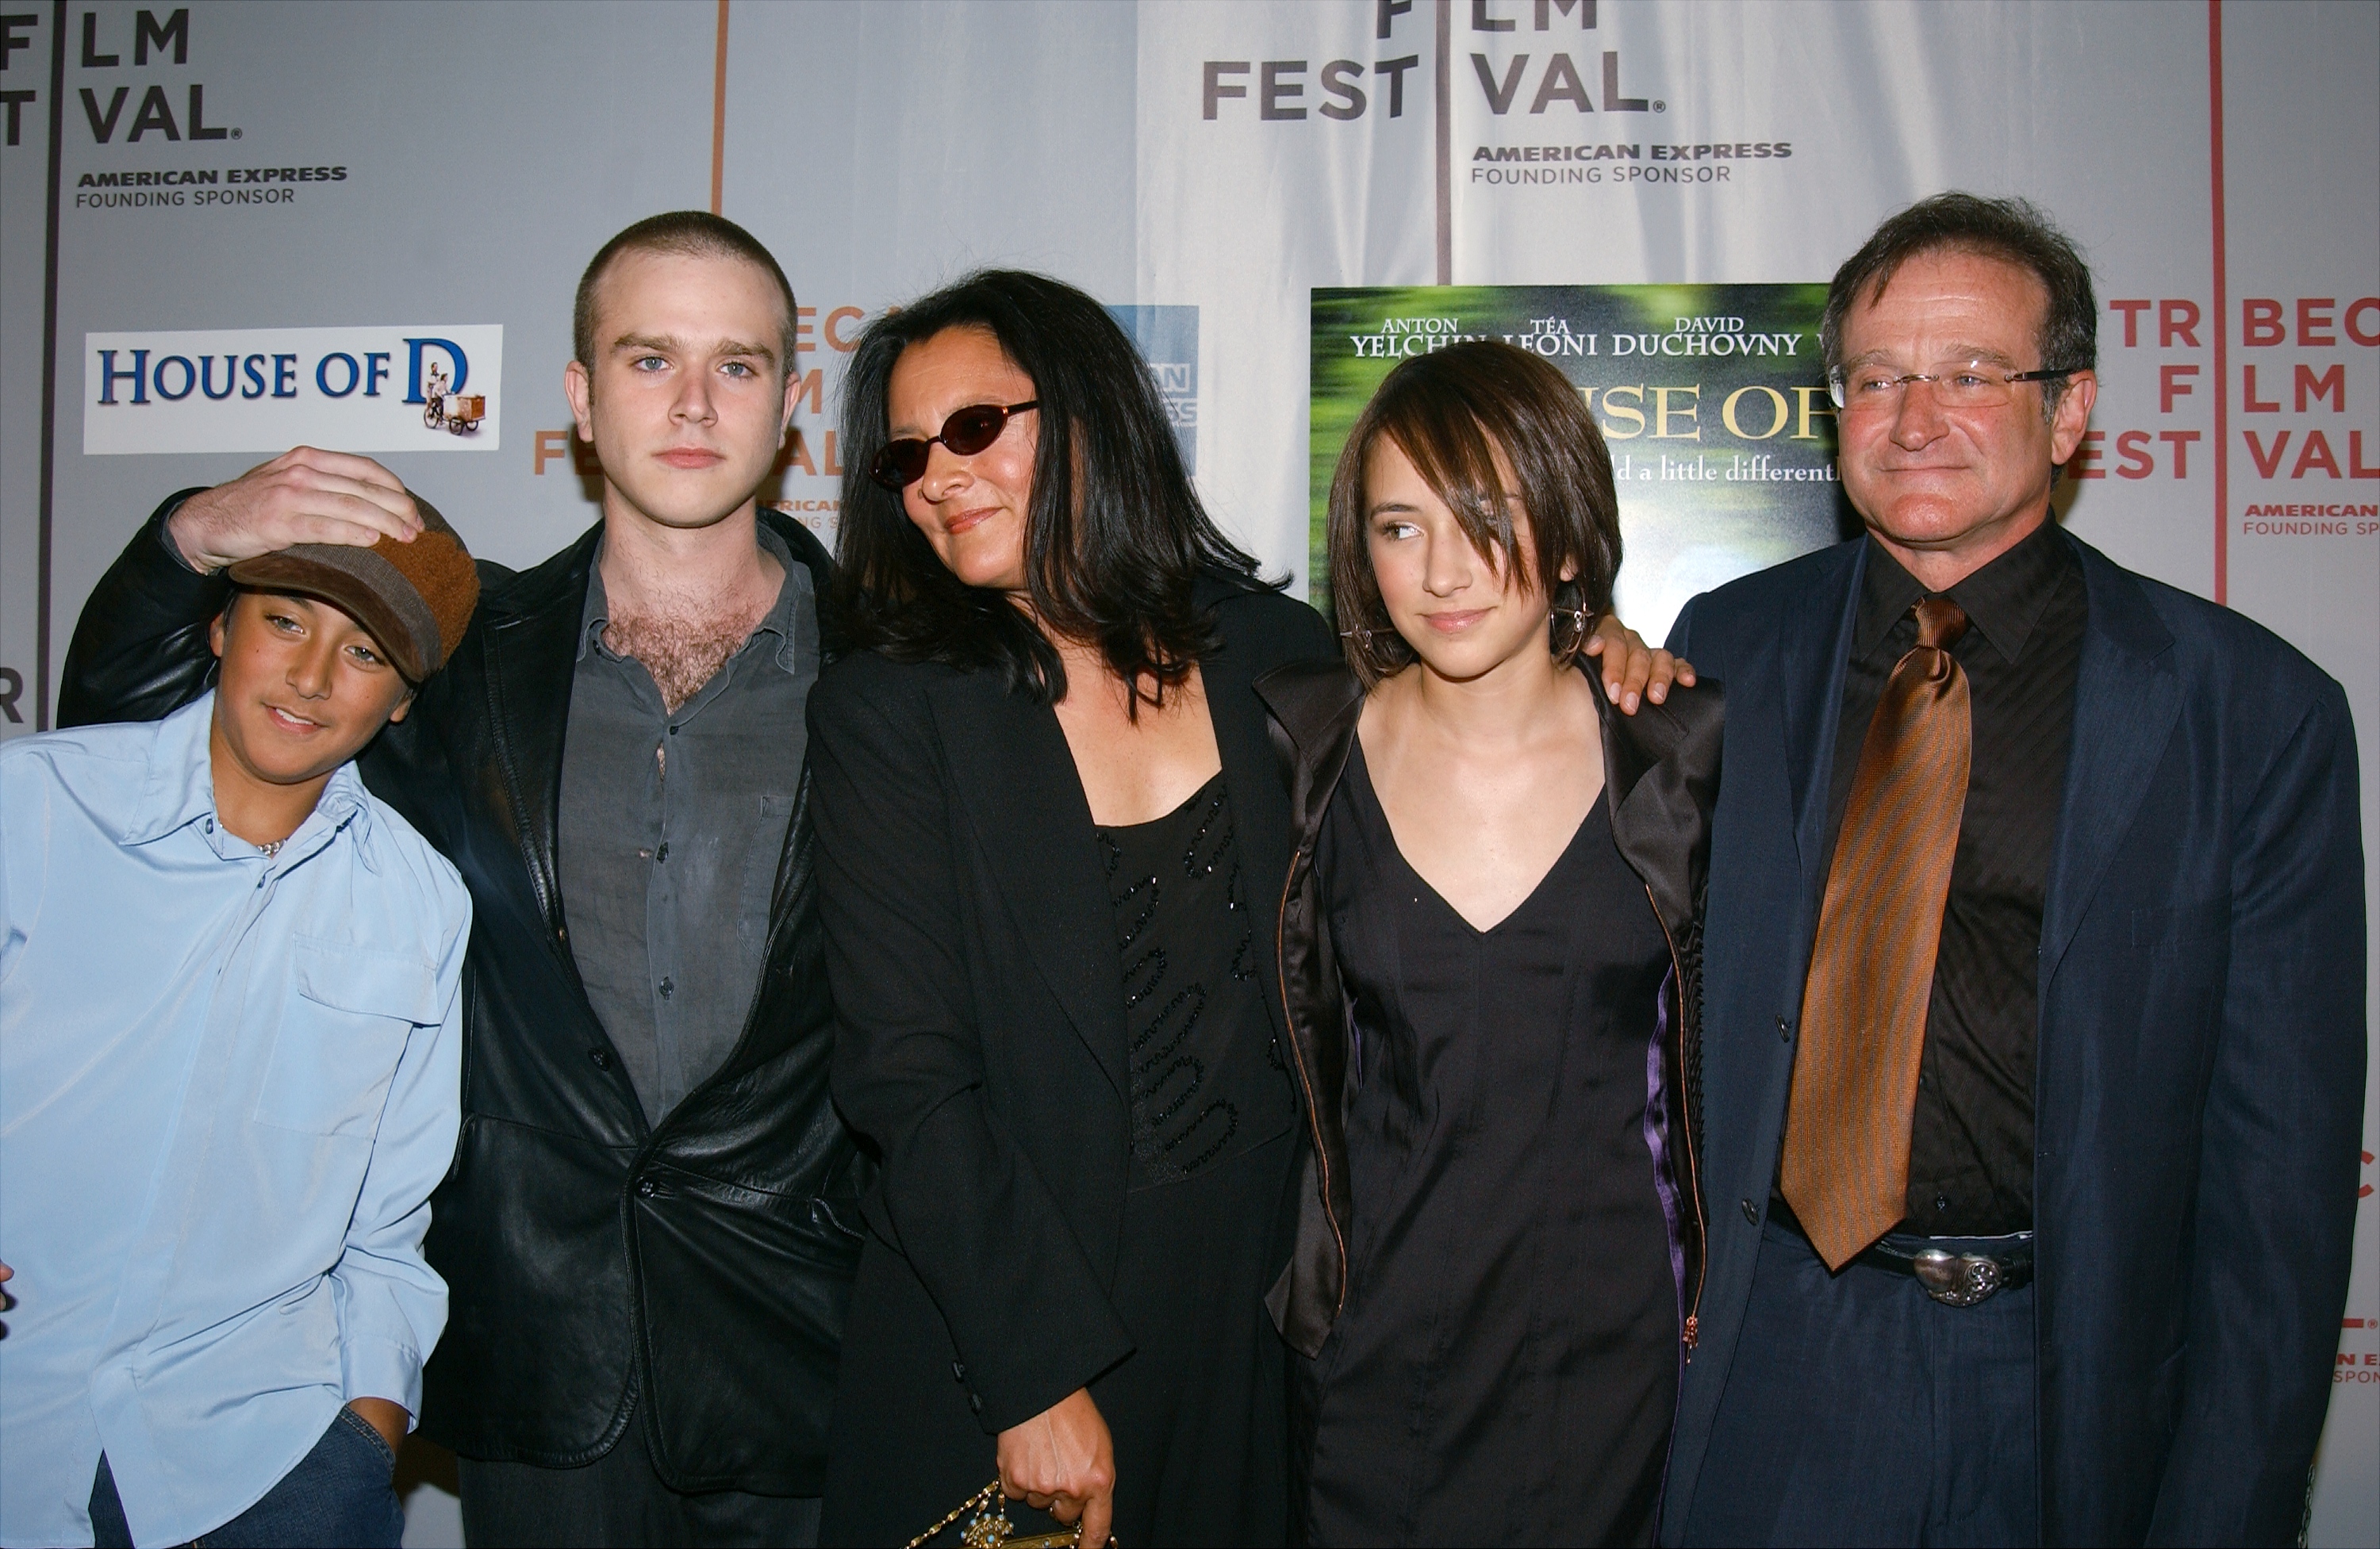 Robin Williams and his second wife Marsha and their children Cody, Zachary, and Zelda Williams at the Tribeca Film Festival screening of "House of D" on West St. on May 7, 2004 | Source: Getty Images